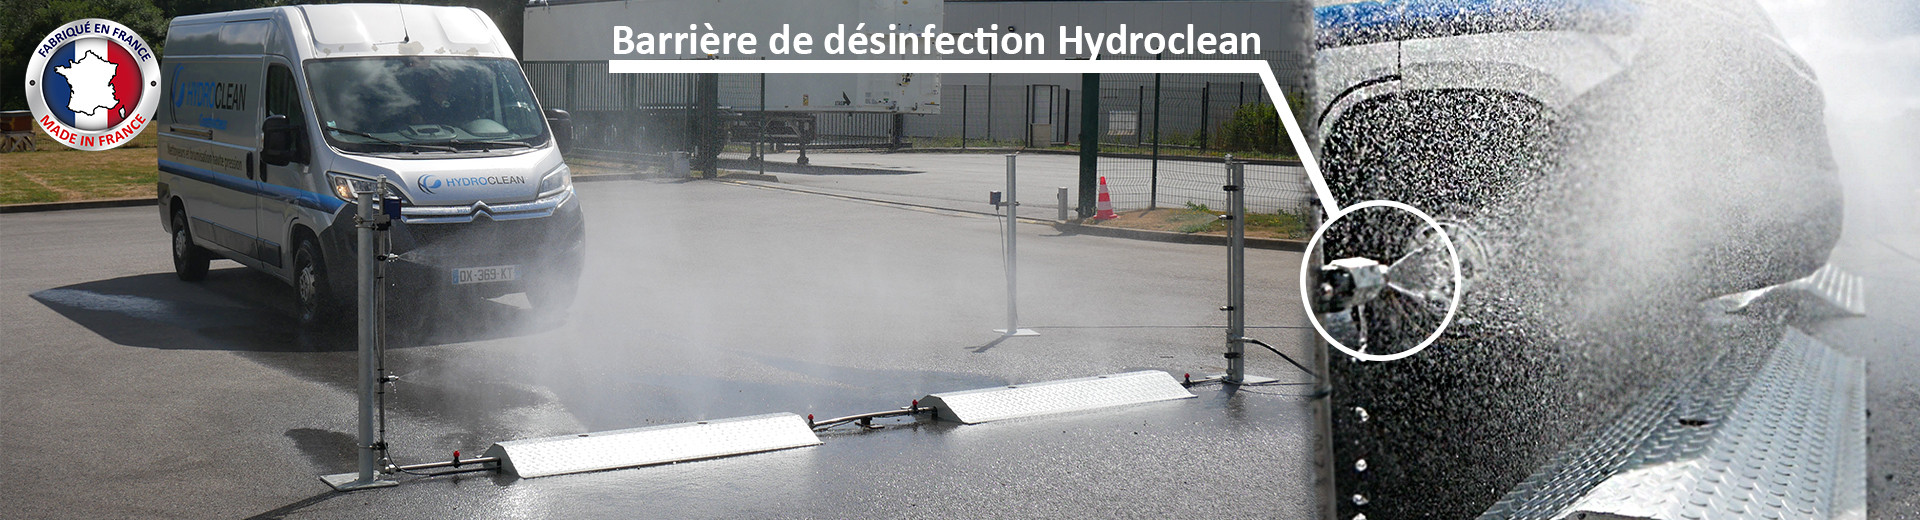 HYDROCLEAN disinfection barrier